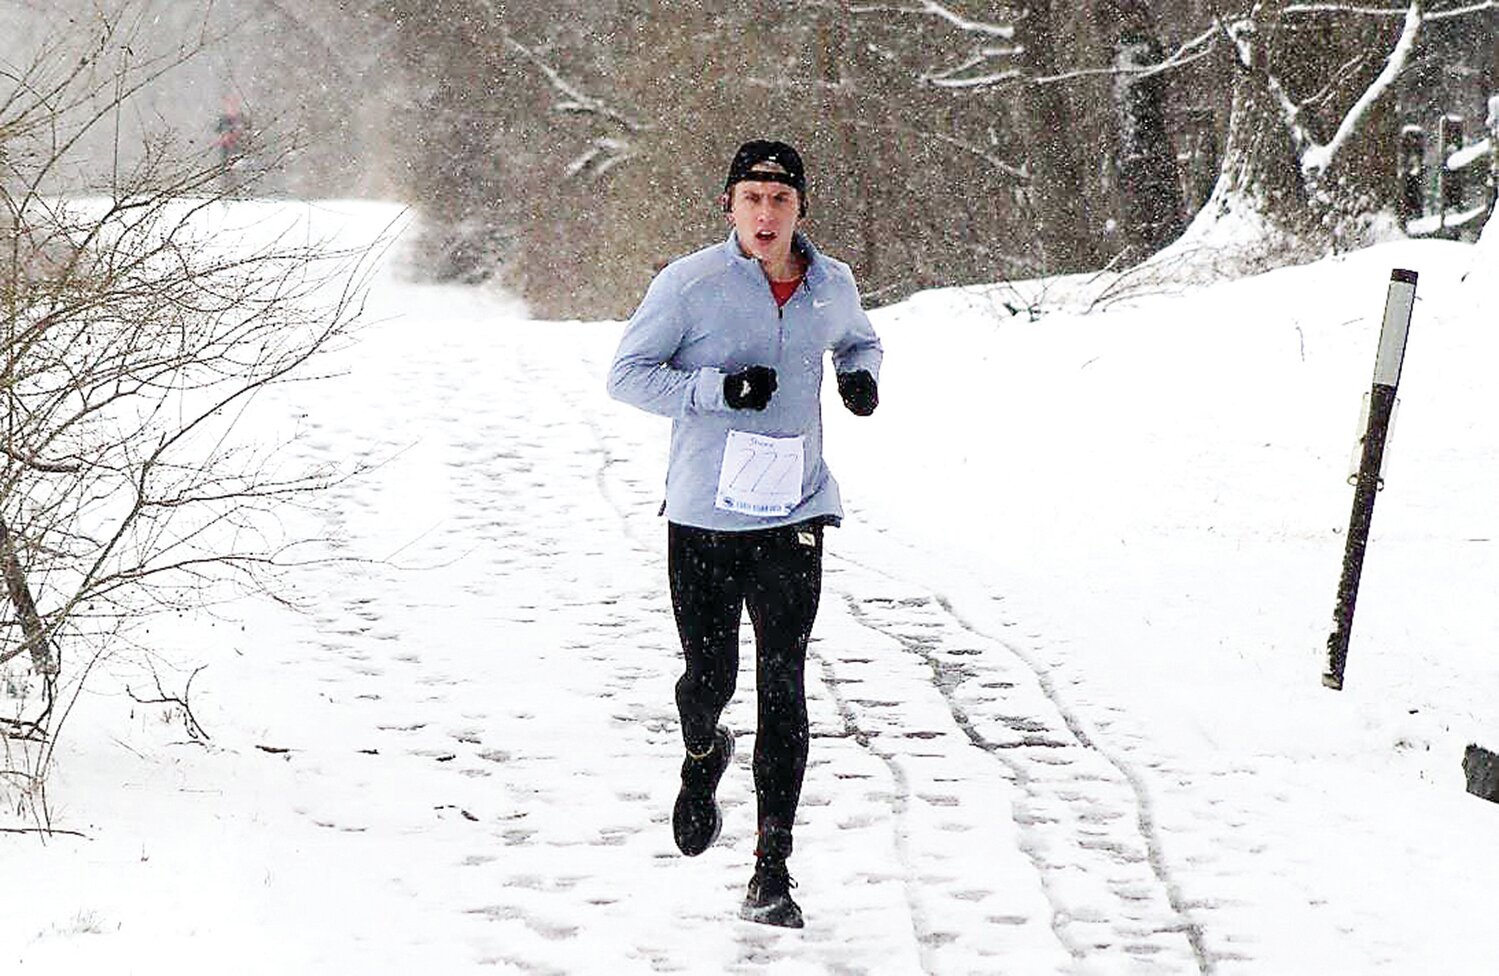 Jamie Gray competes in a BCRR Winter Series race.